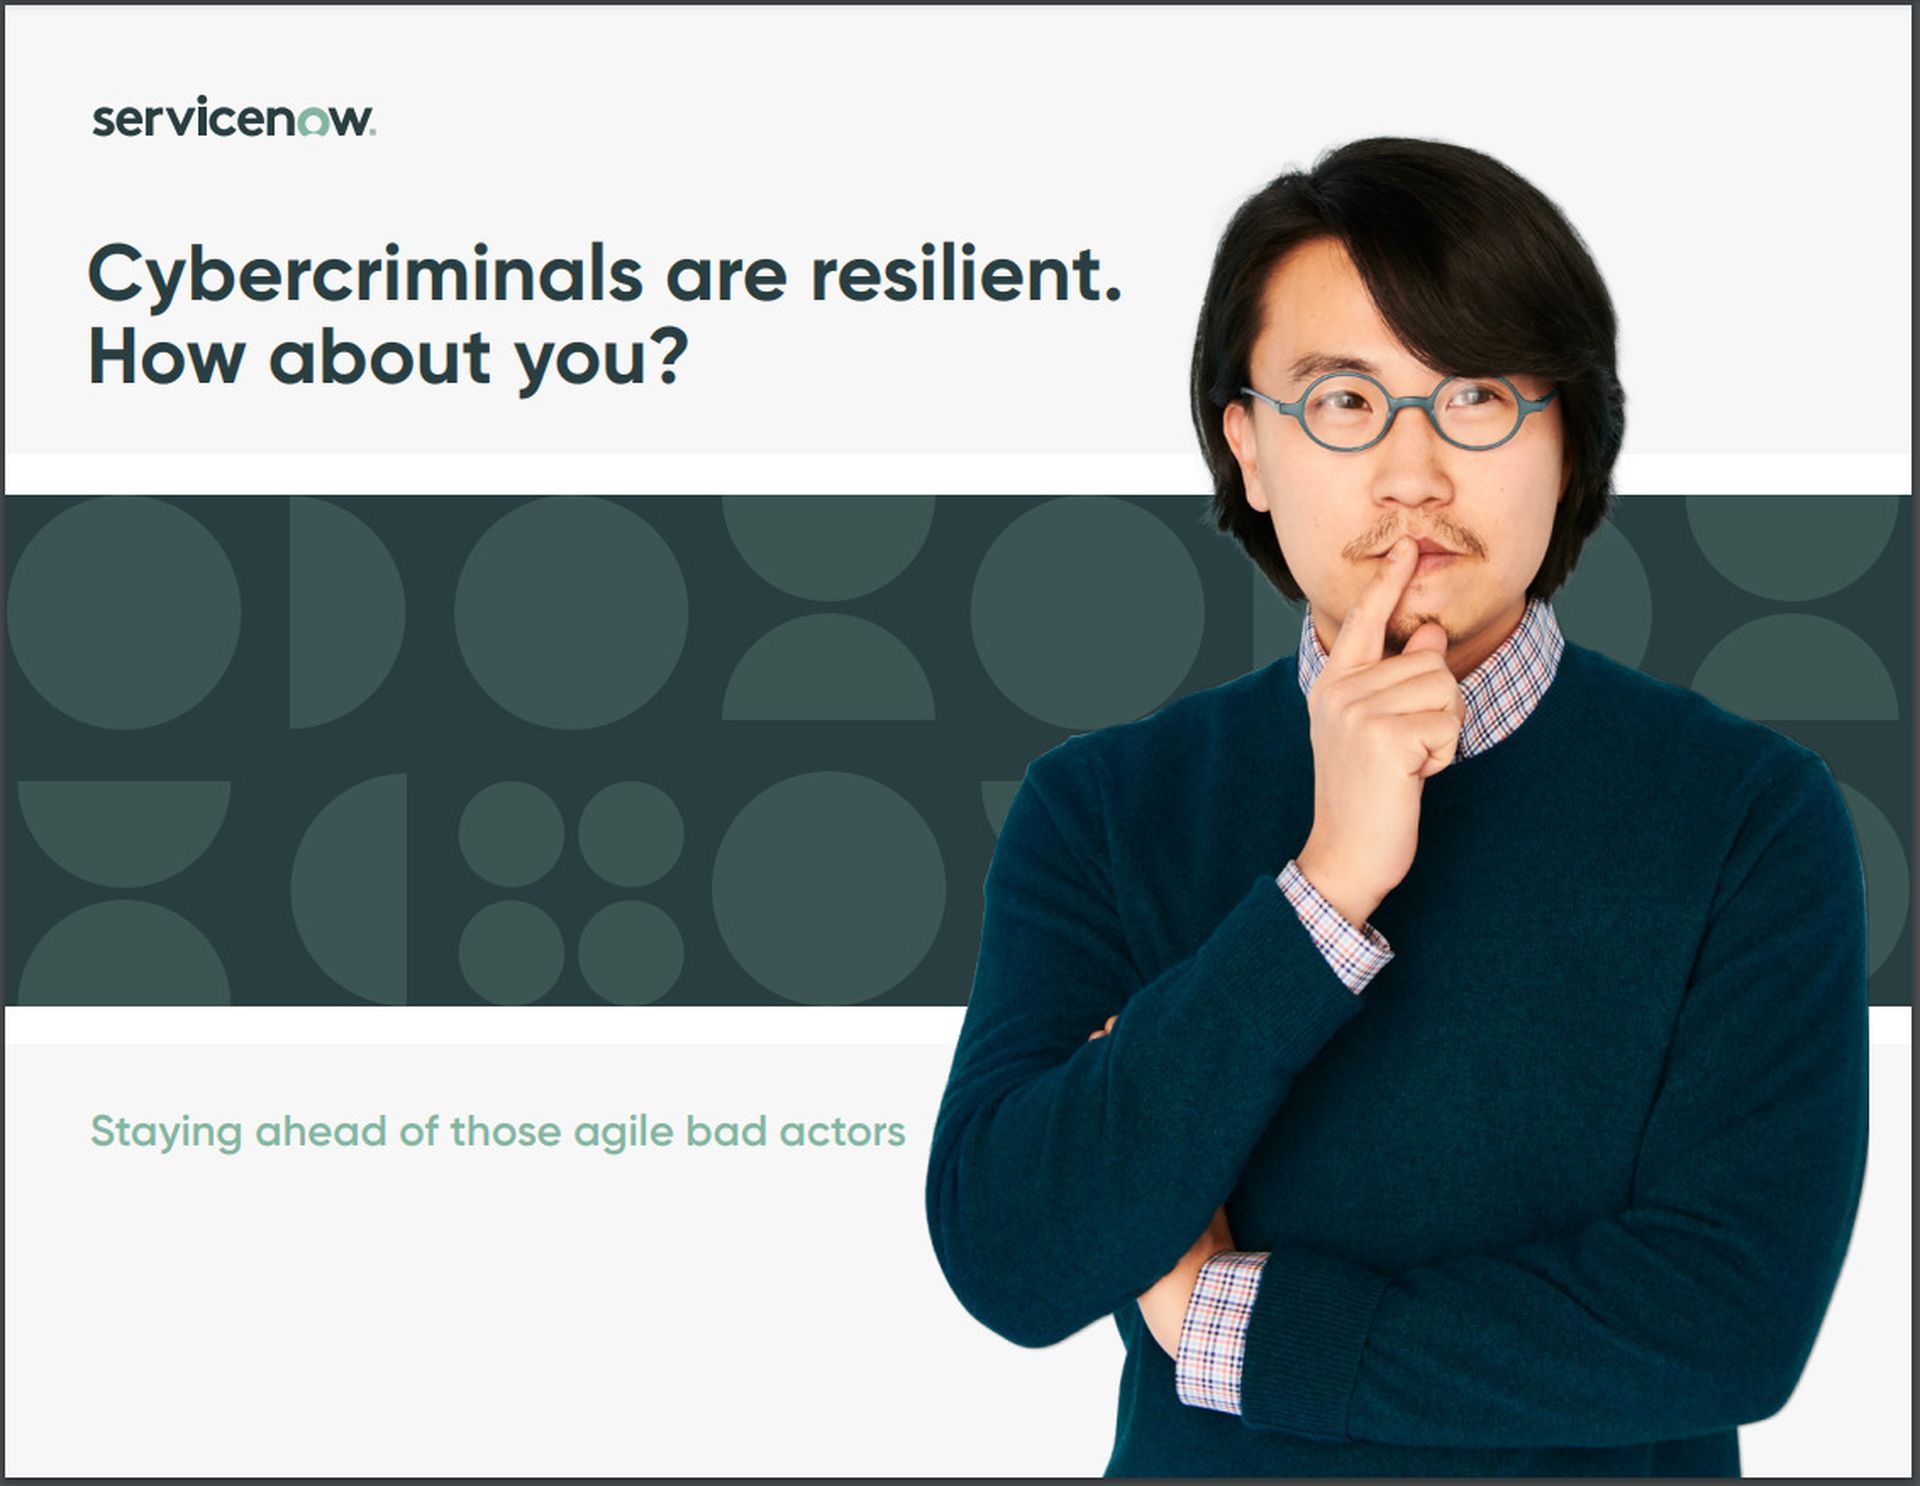 Cybercriminals are resilient. How about you?